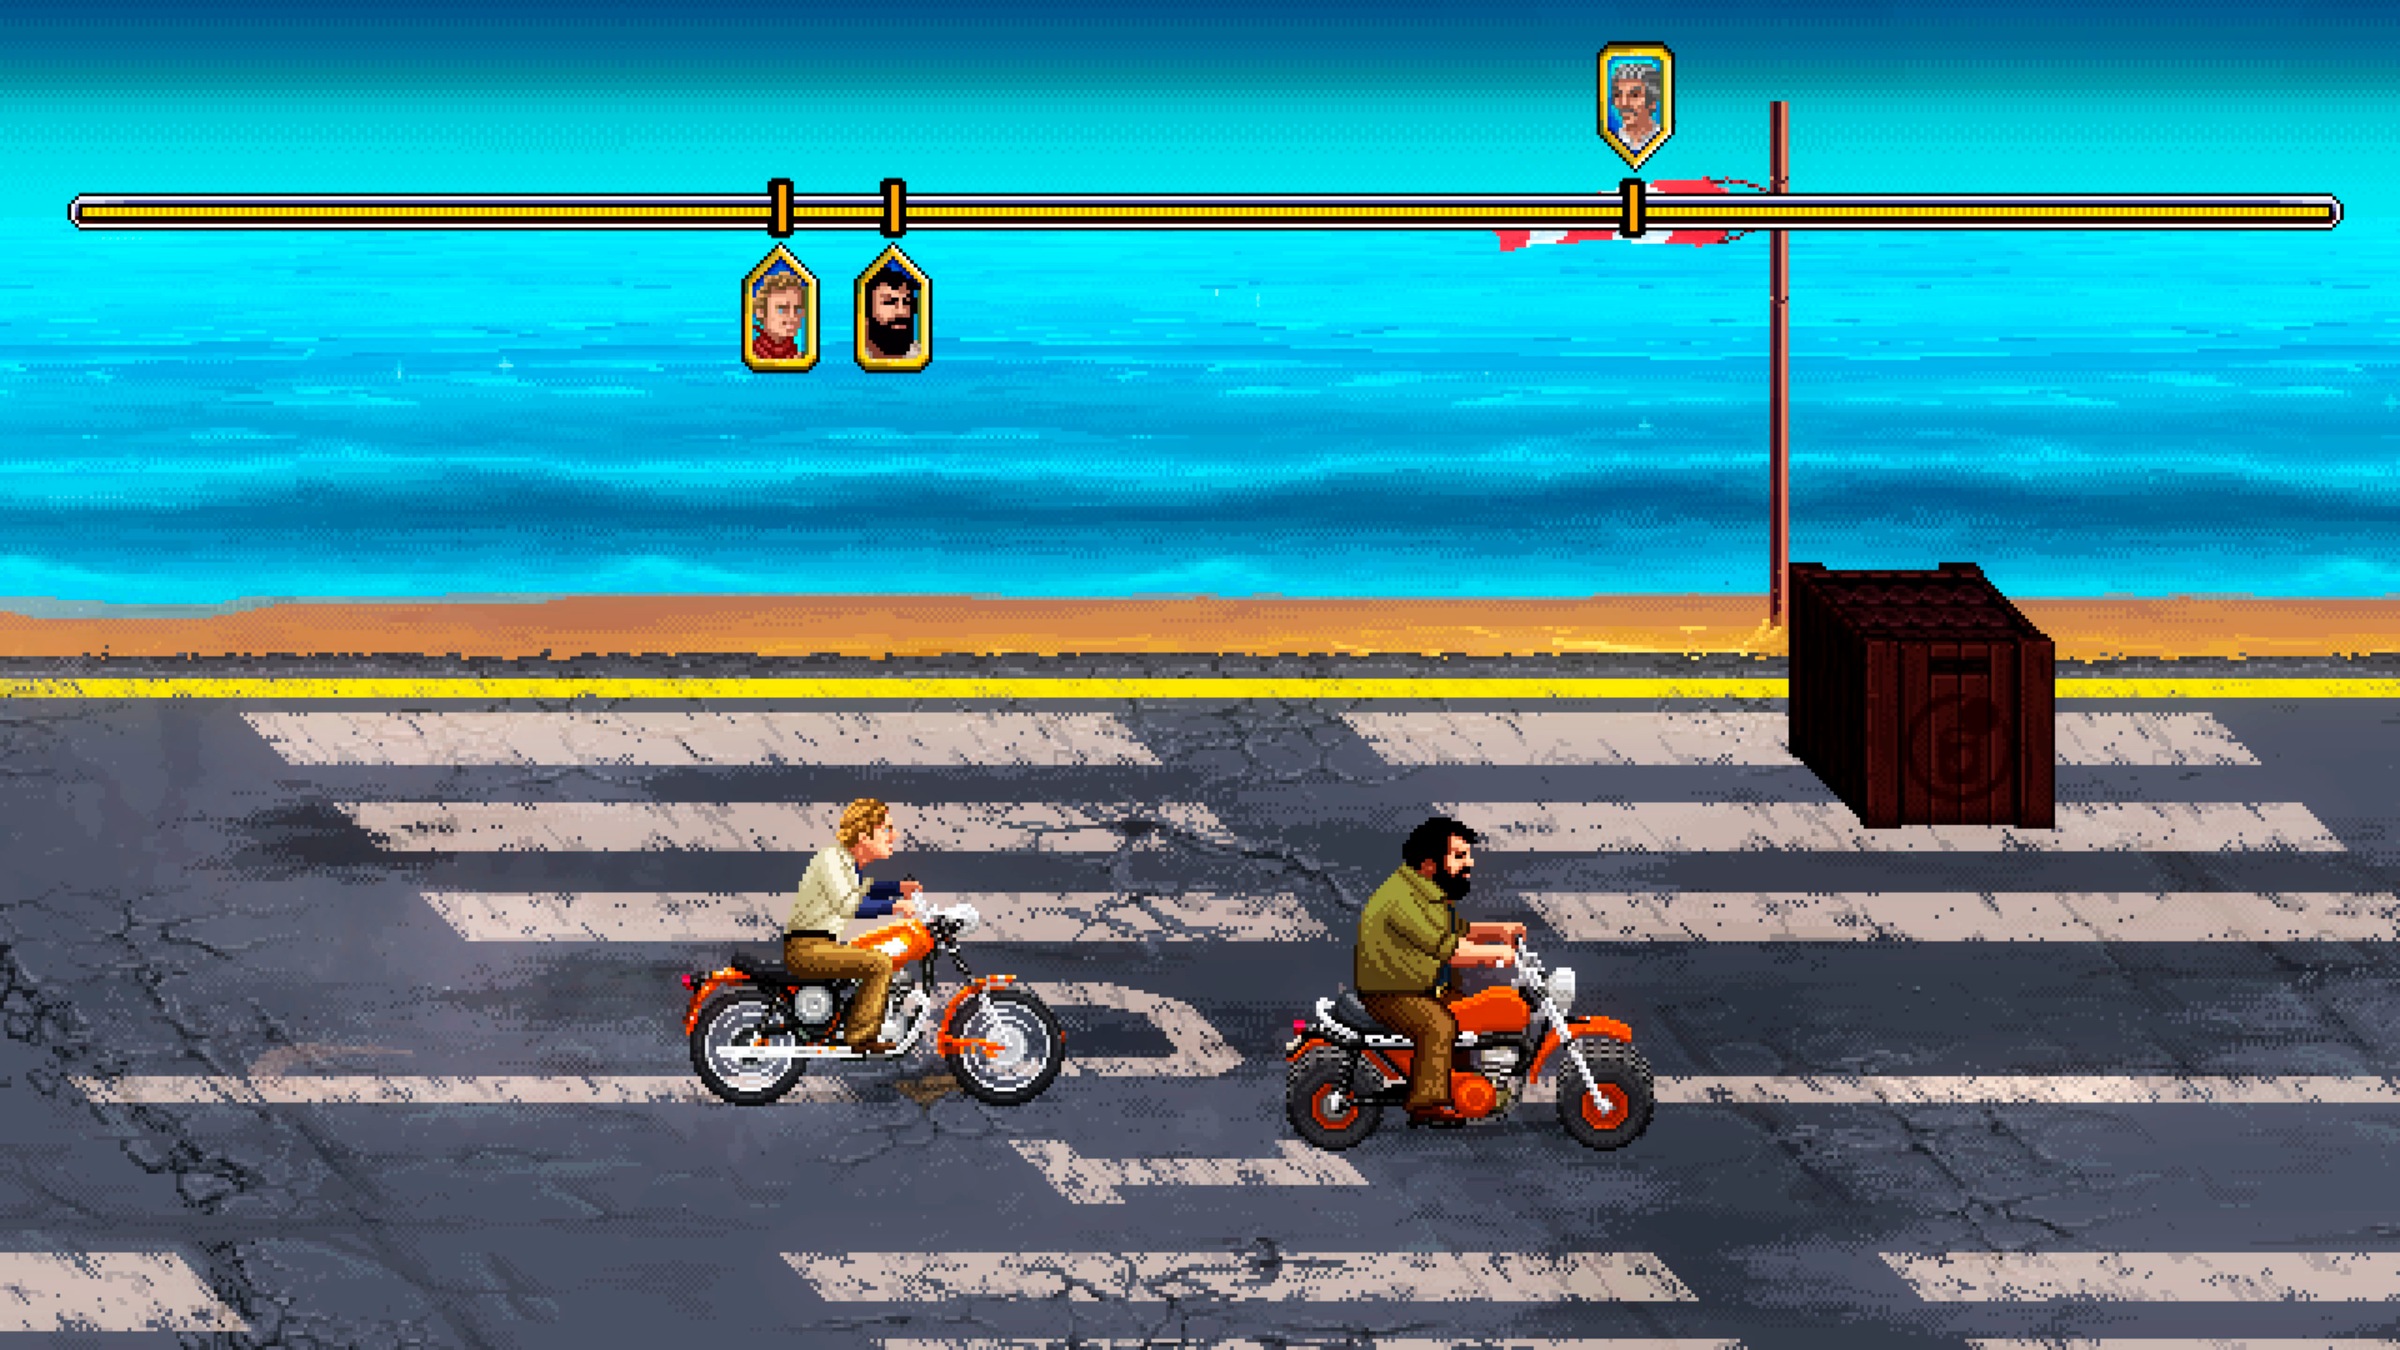 Spielesoftware »Bud Spencer & Terence: Hill Slaps and Beans«, PlayStation 4